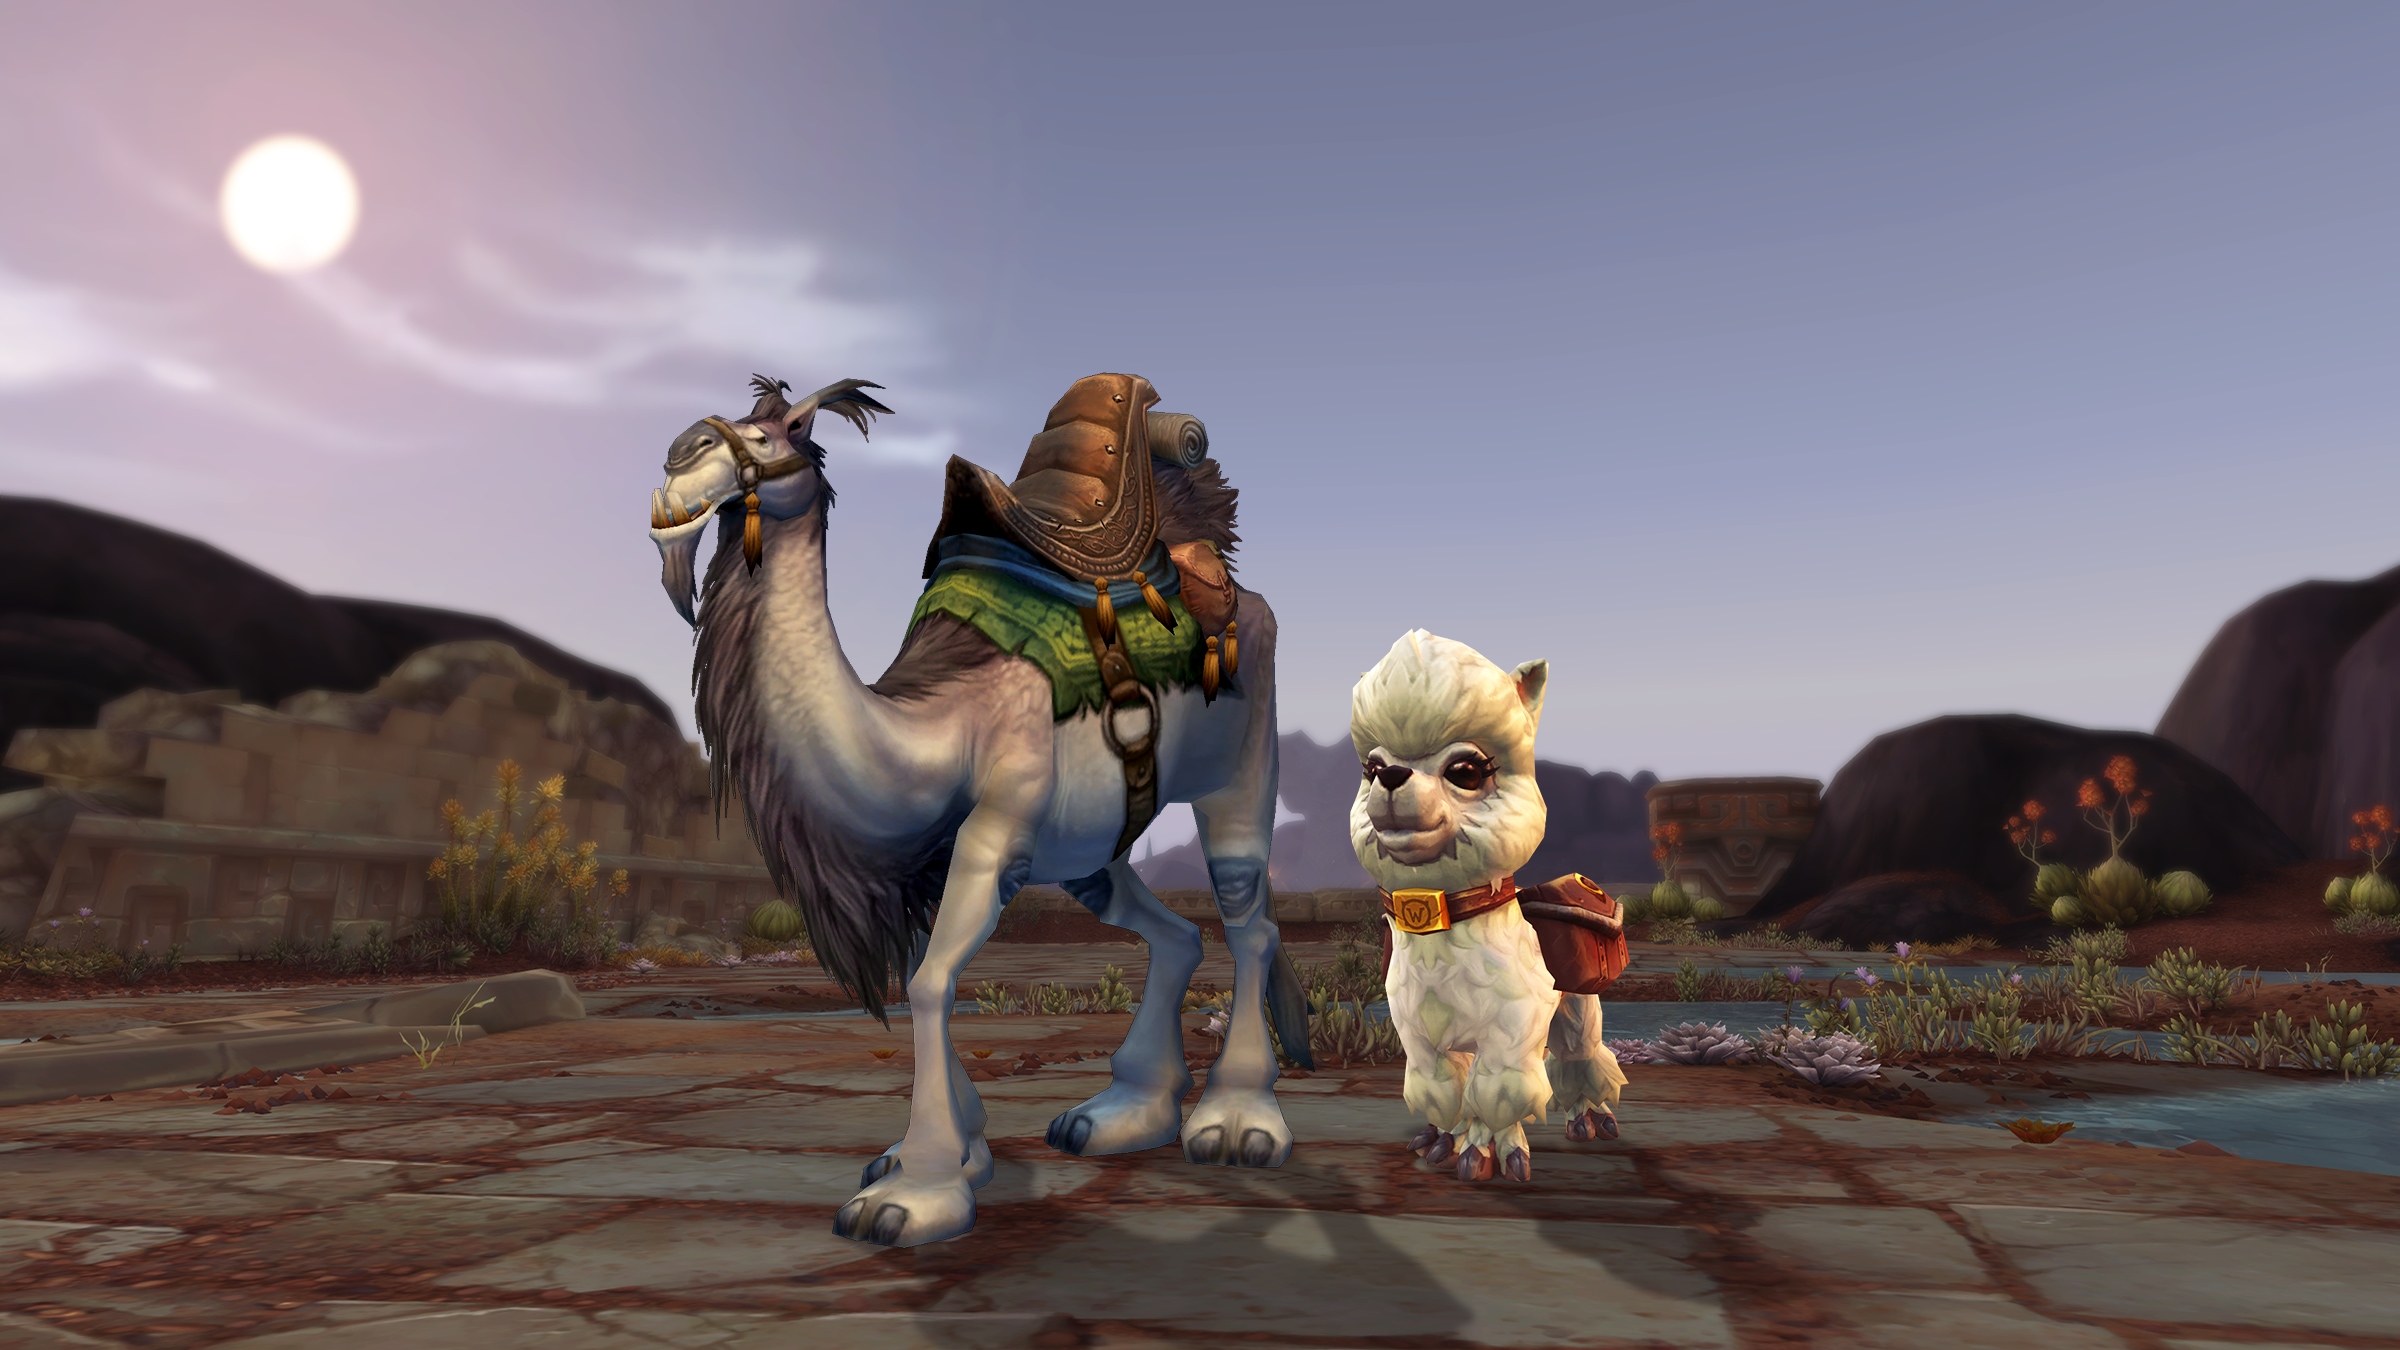 Dragonflight Twitch Drops: Get the Dottie Pet and White Riding Camel Mount - Now Live!